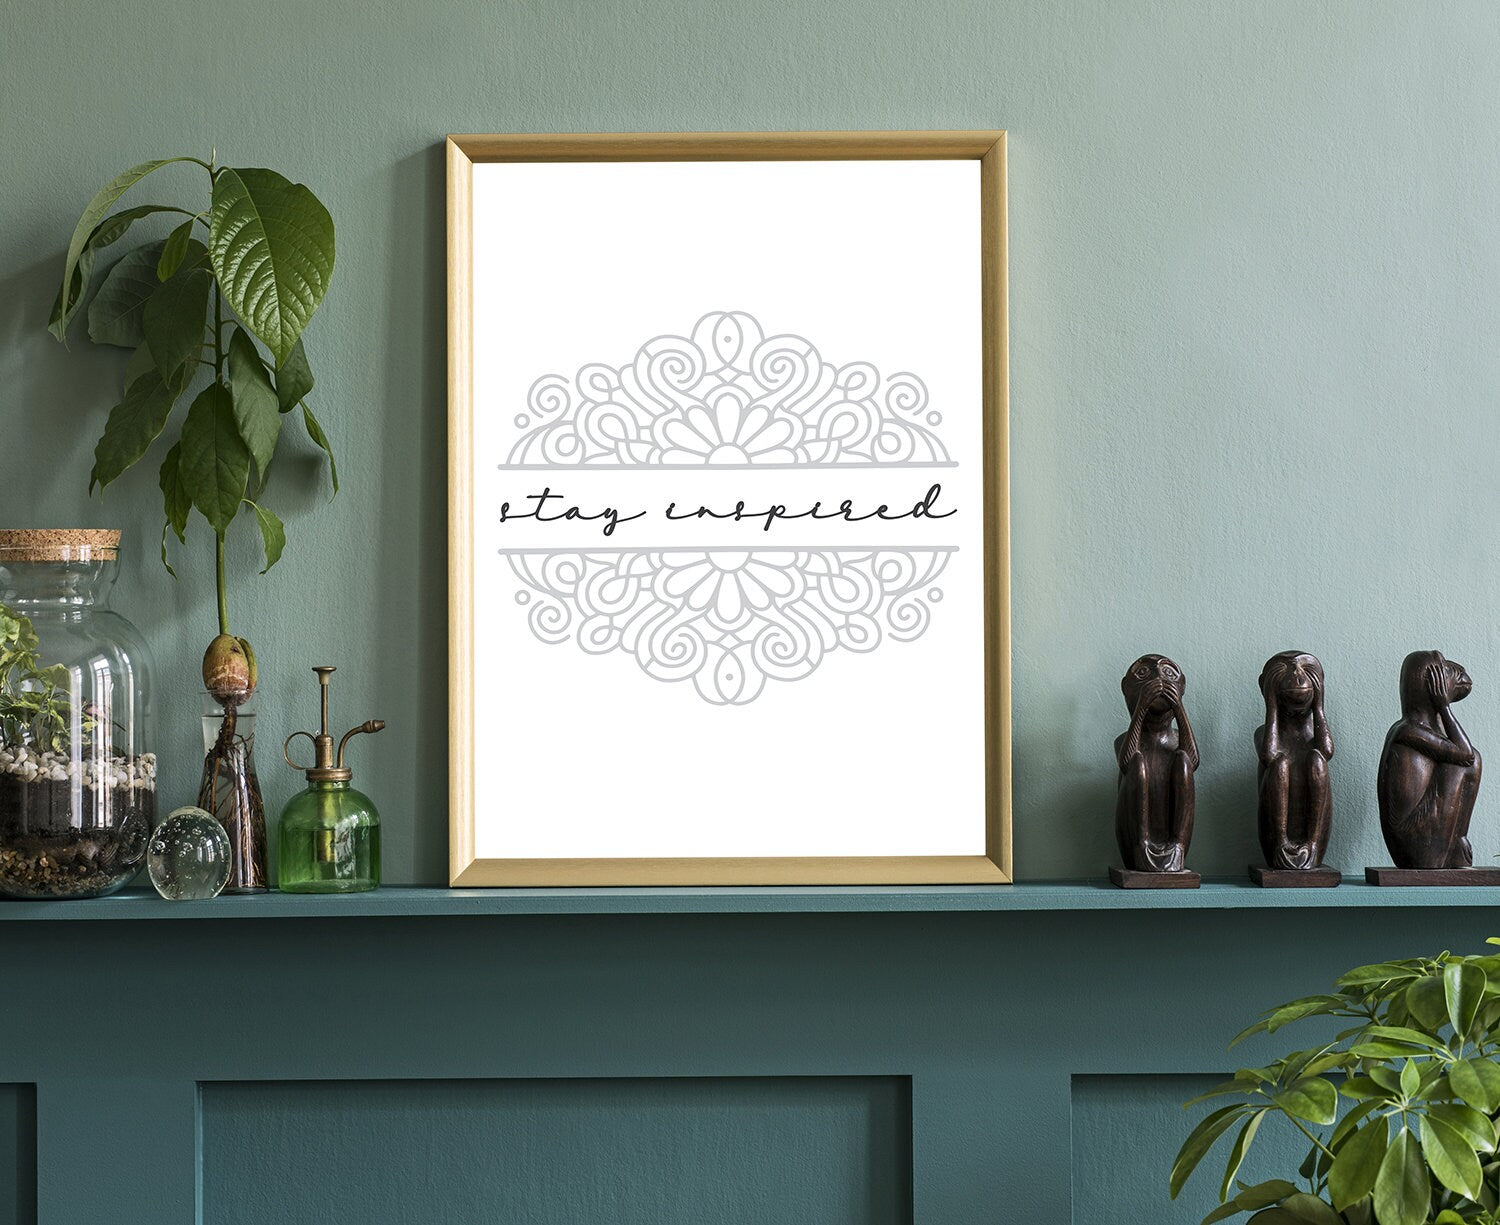 Stay Inspired, Poster Prints, Modern Poster print, Home wall art poster, Dorm Room wall decor, Office wall decor, Motivational quote poster